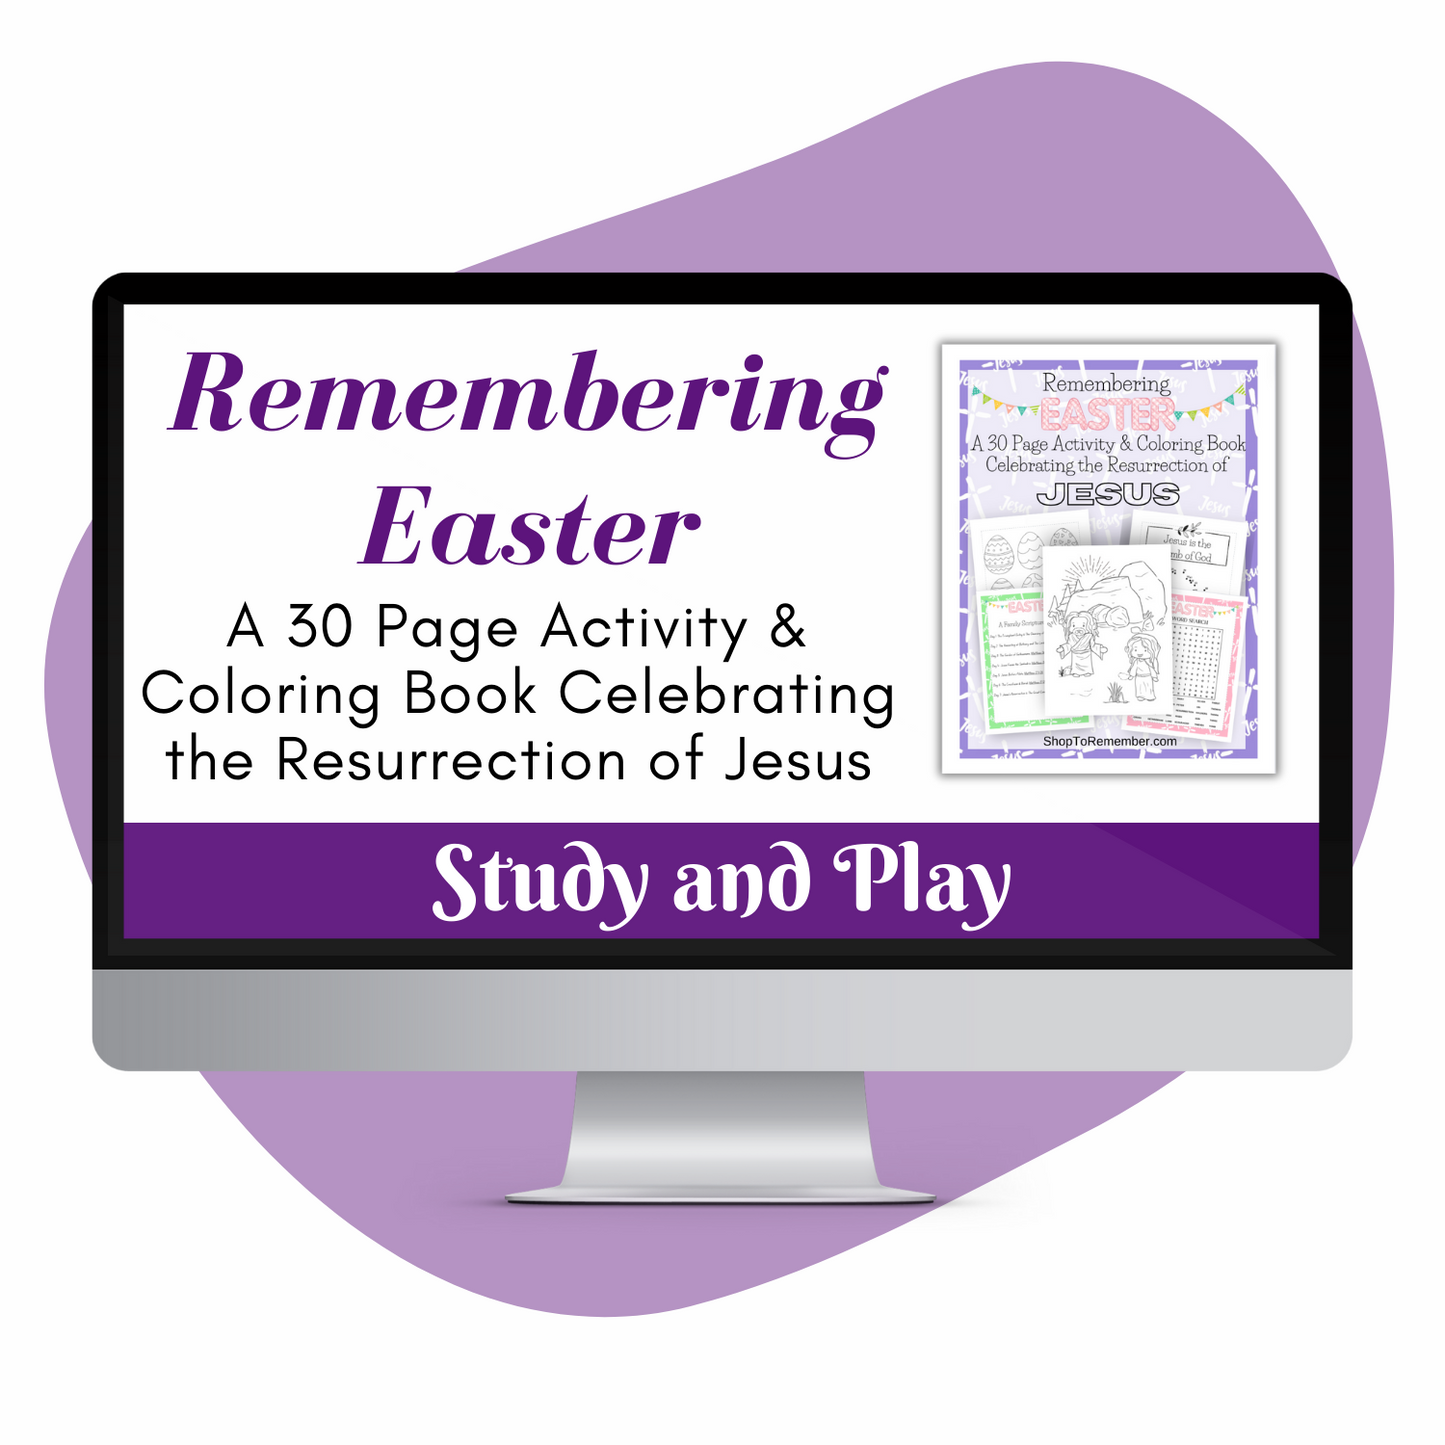 Remembering Easter: Christian Coloring and Activity Pages Celebrating the Resurrection of Jesus